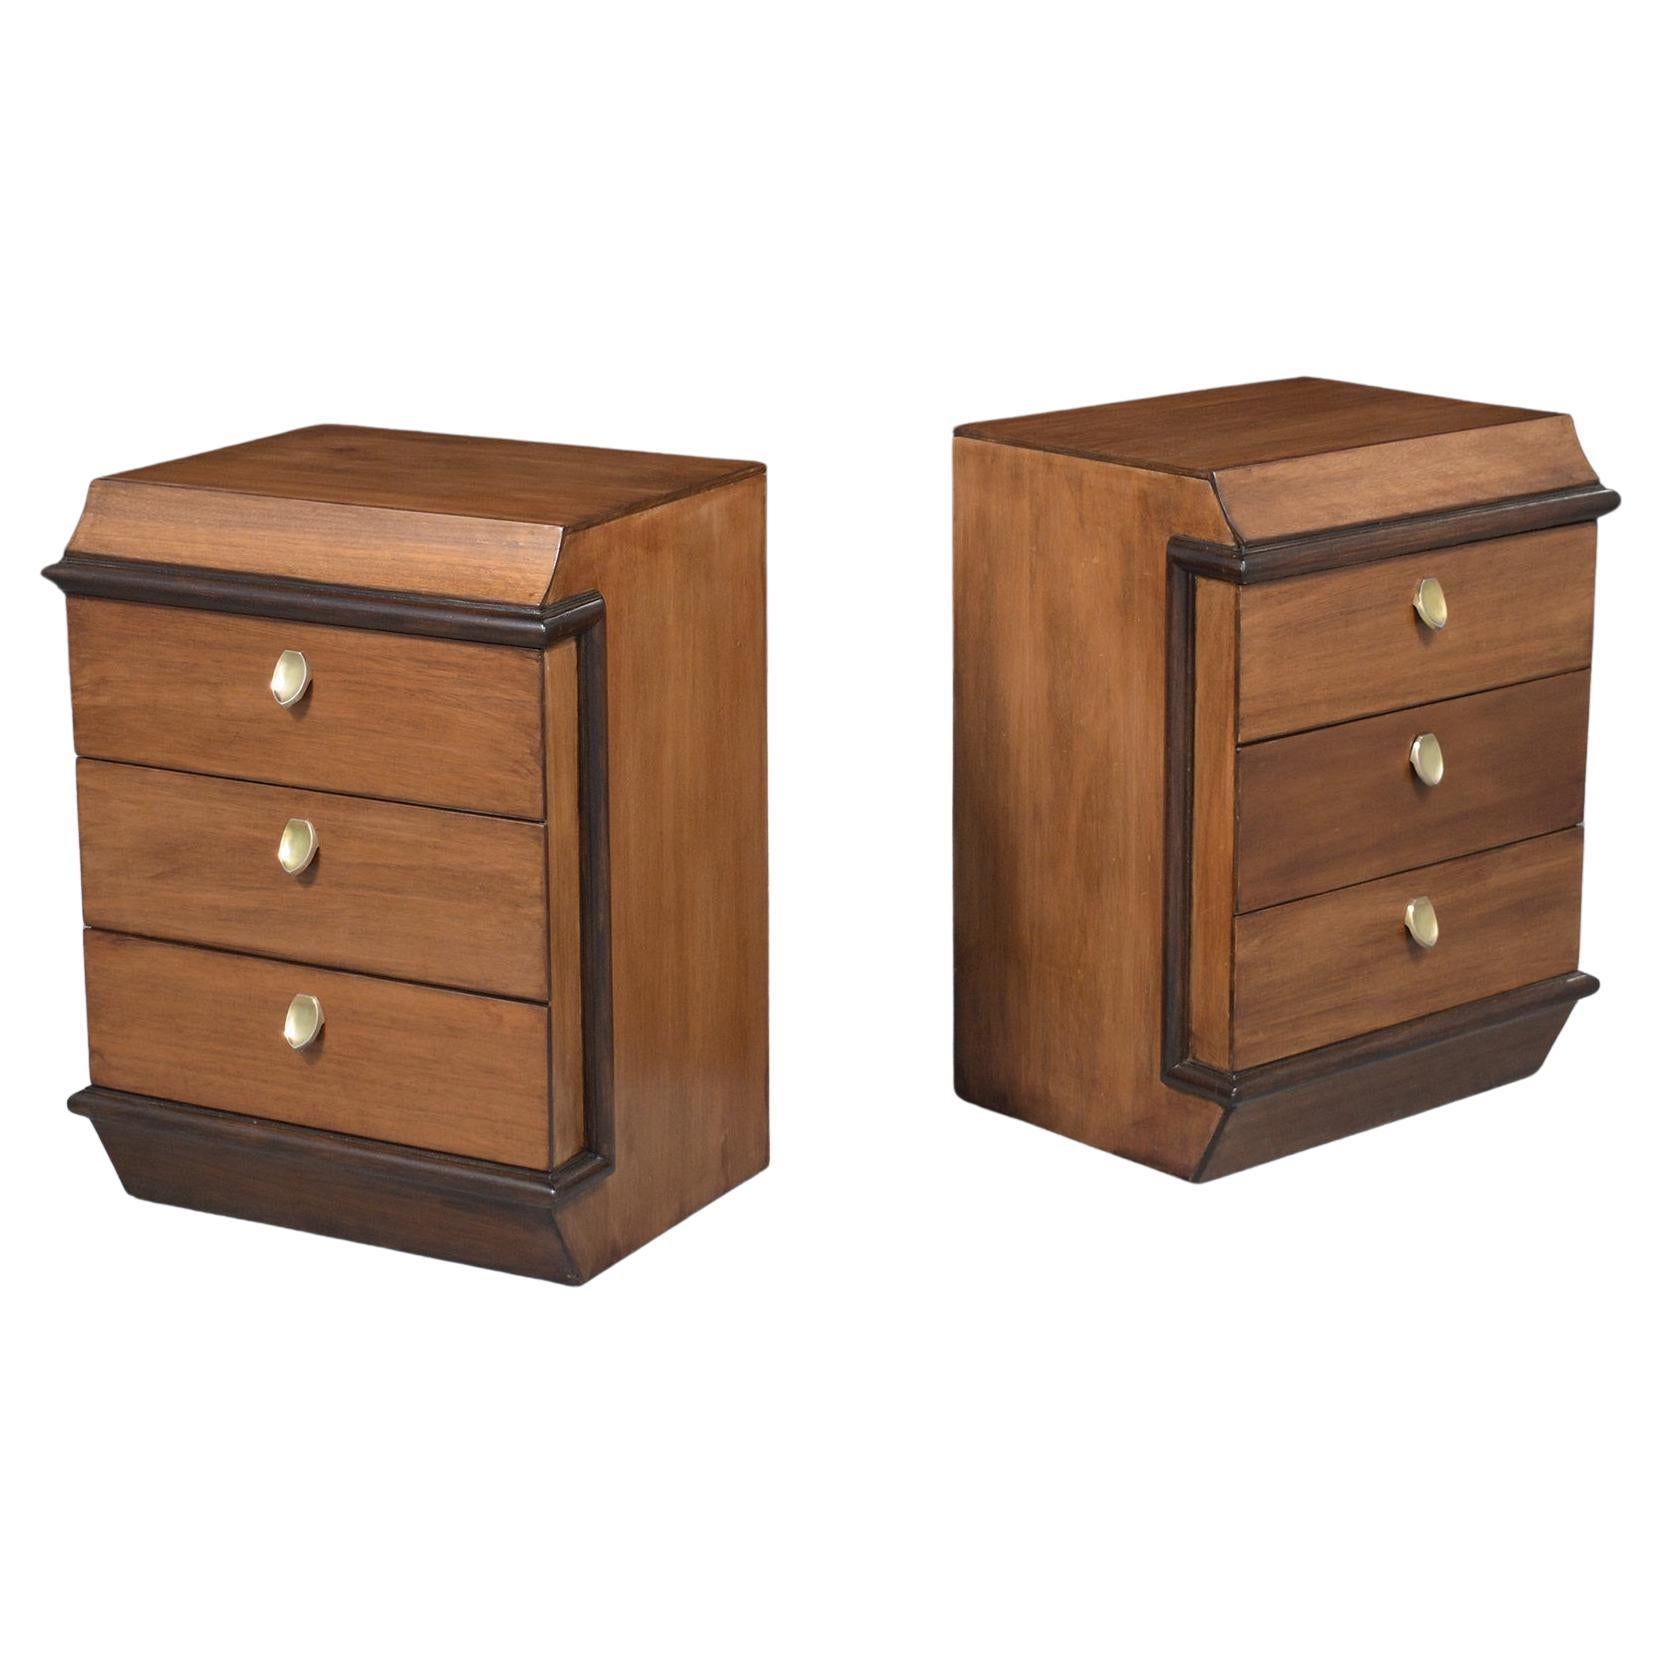 1960s Mid-Century Modern Walnut Nightstands - A Timeless Pair Restored For Sale